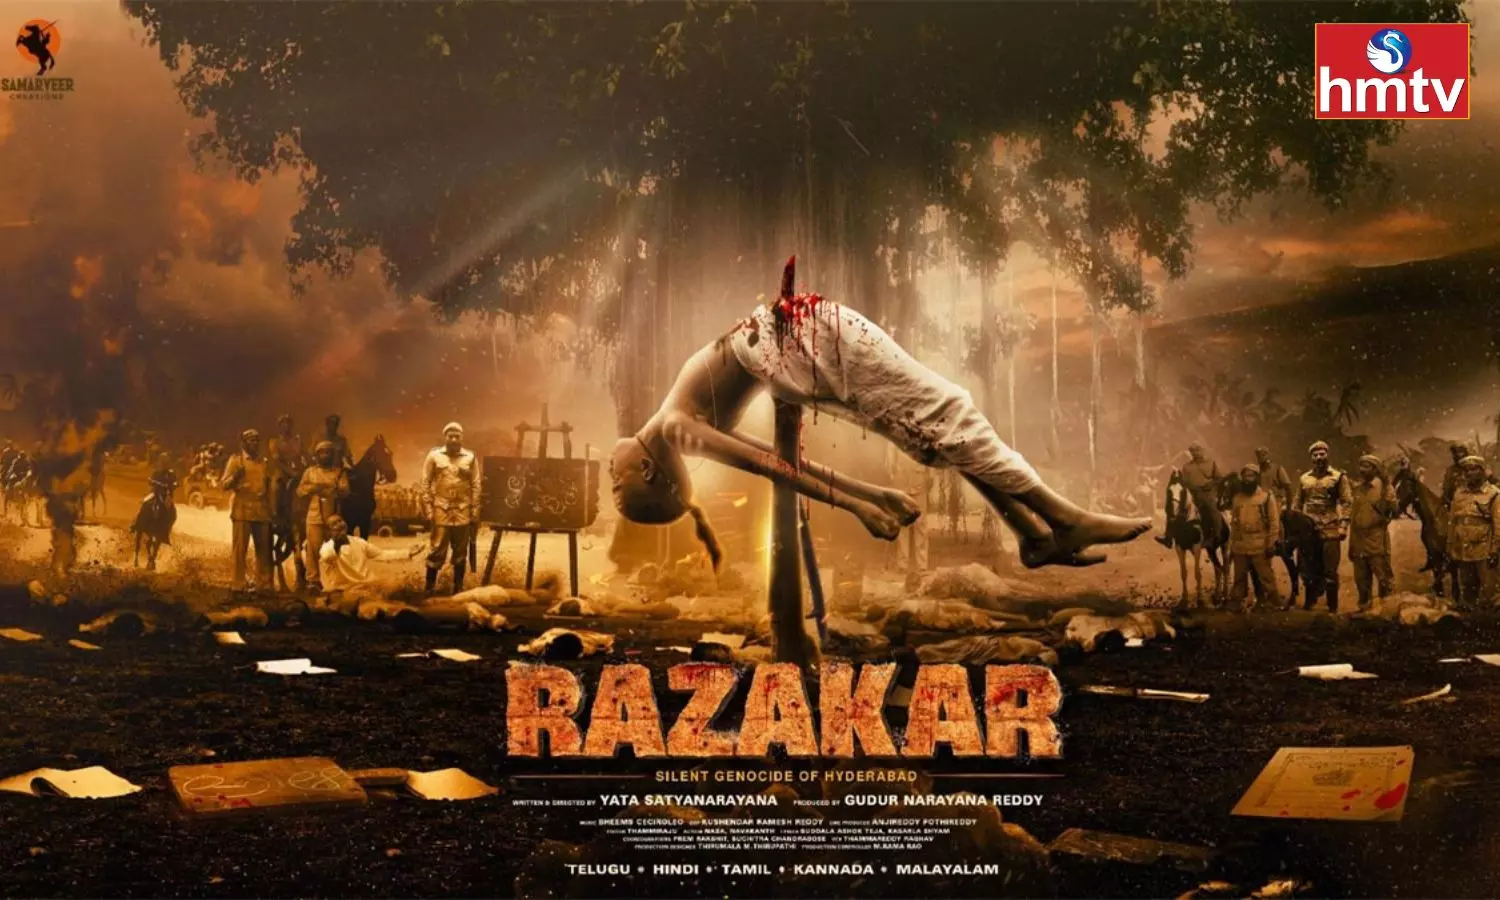 TS High Court Dismissed The Petition Filed To Stop The Release Of The Movie Razakar